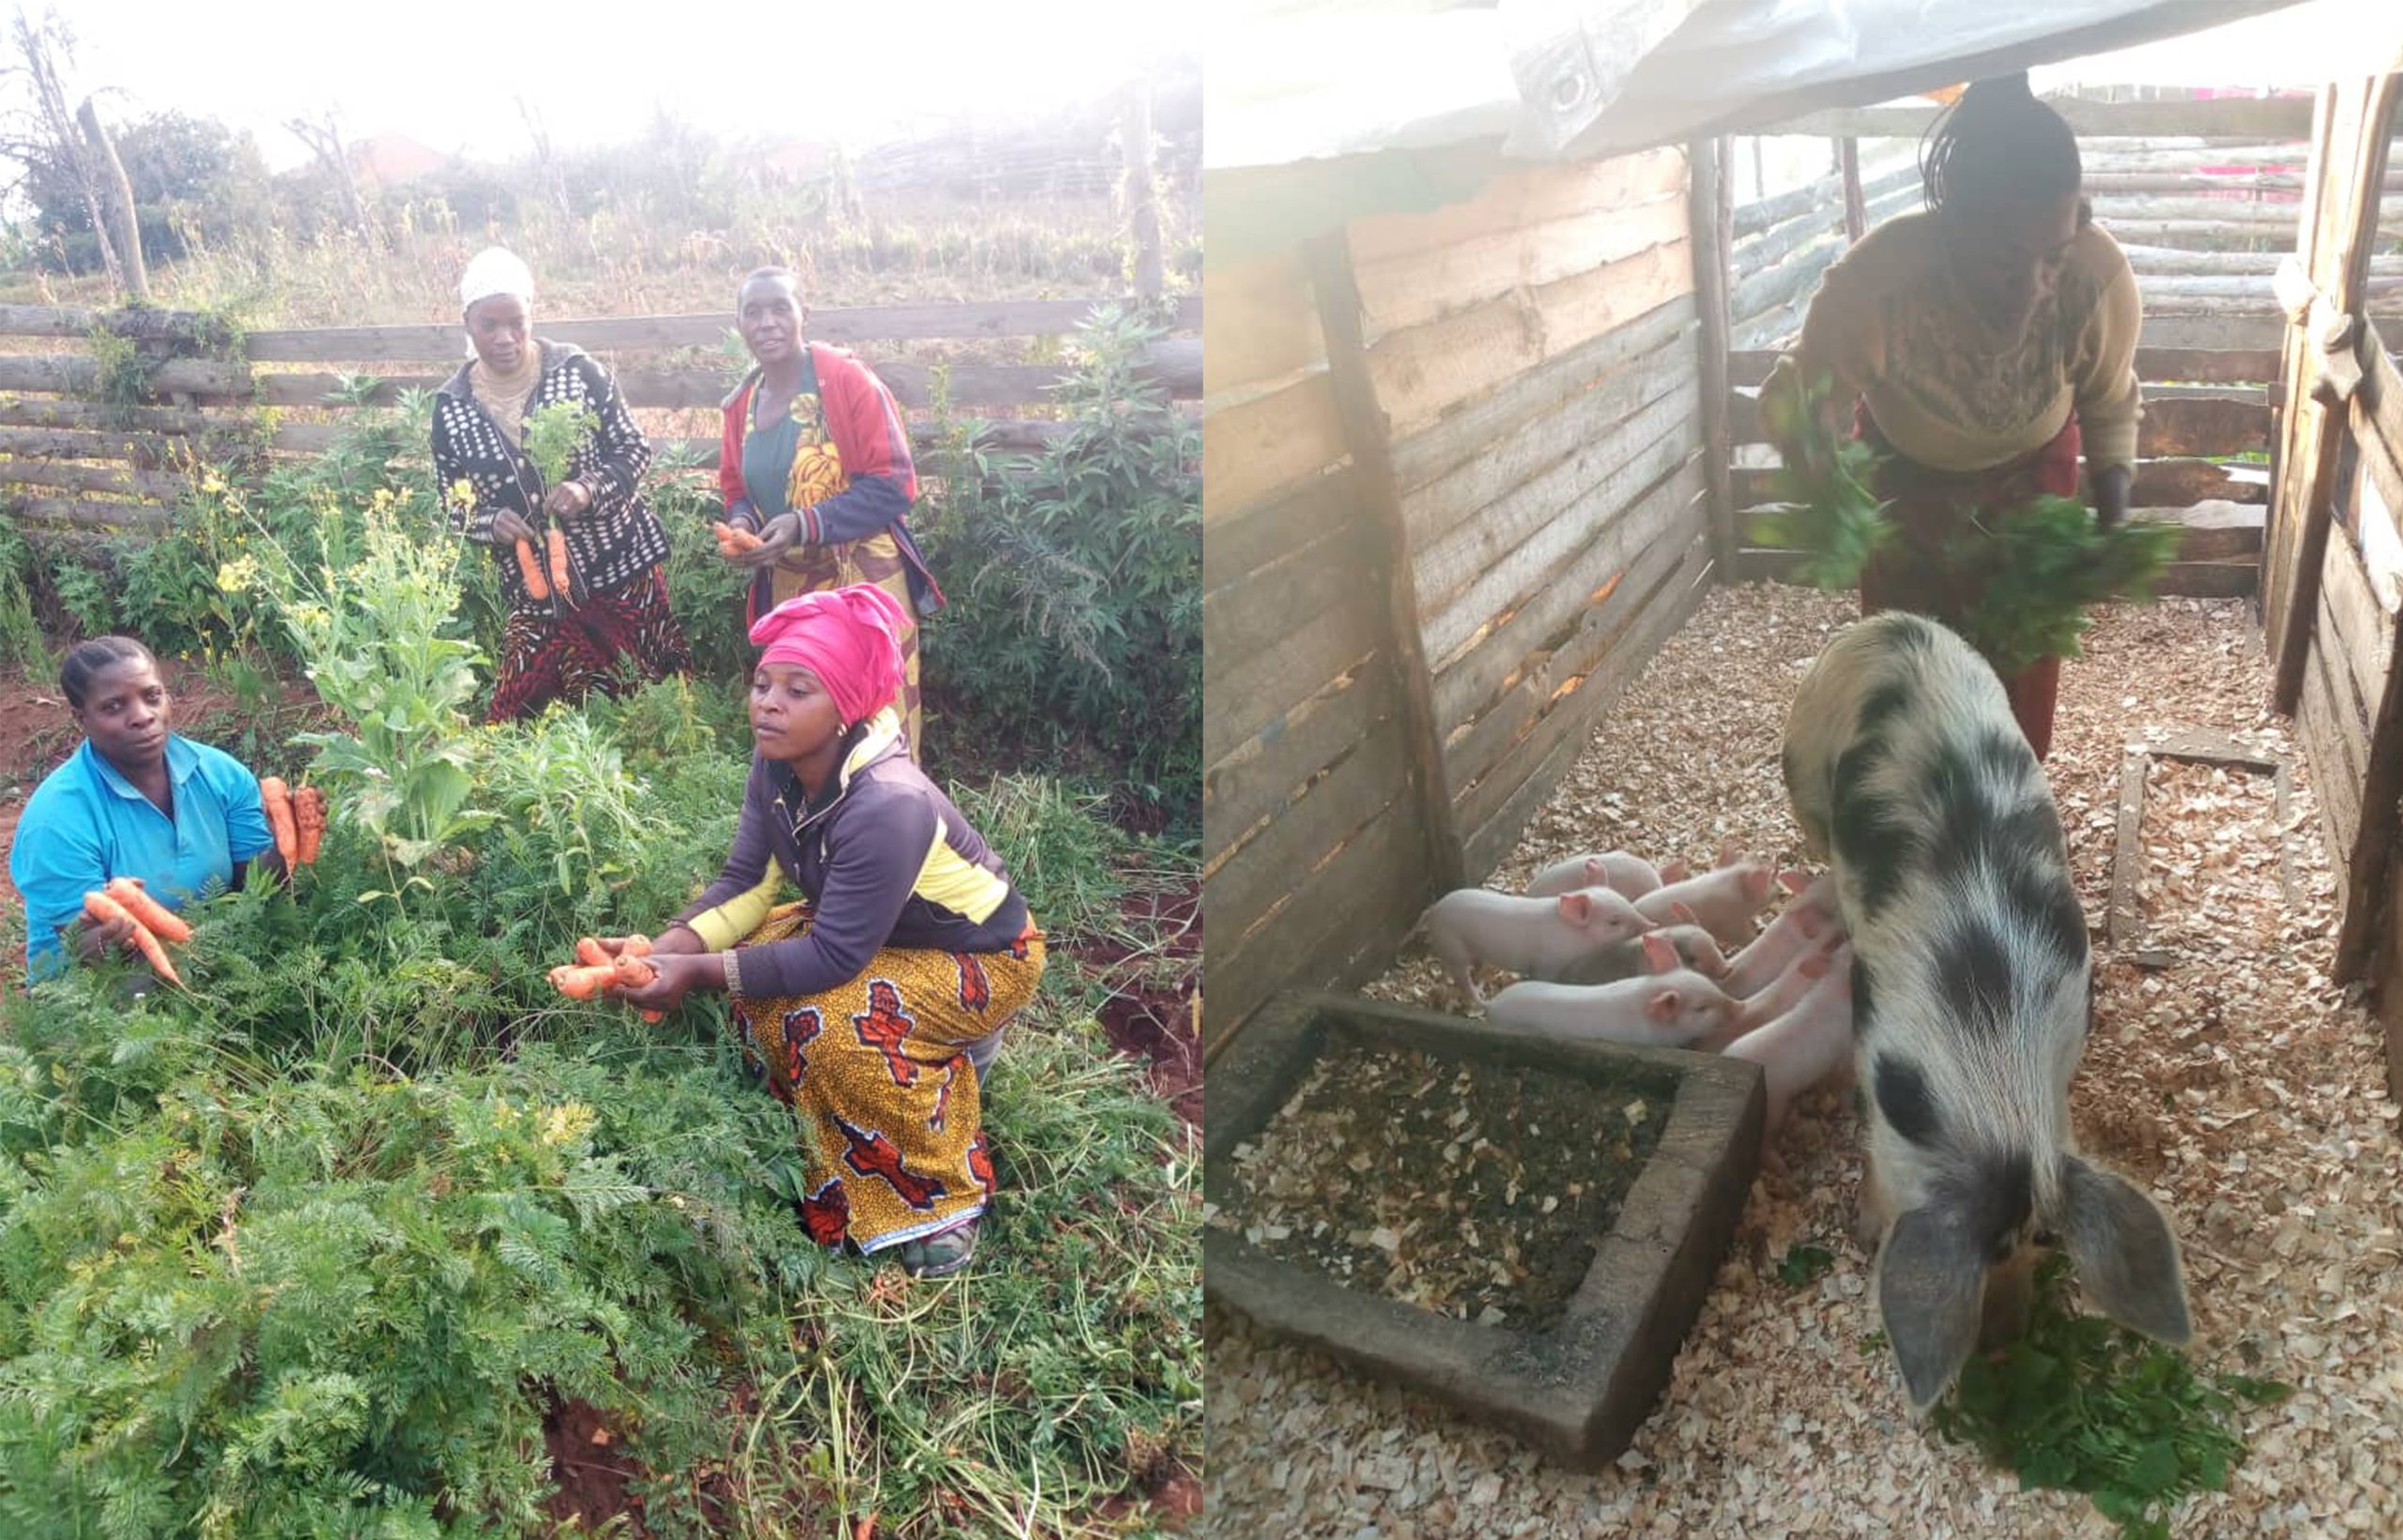 (L) Zeolia, CAMFED Business Guide, gardening carrots with three other CAMFED Association members, (R) Zeolia is pictured feeding pigs outside in Tanzania